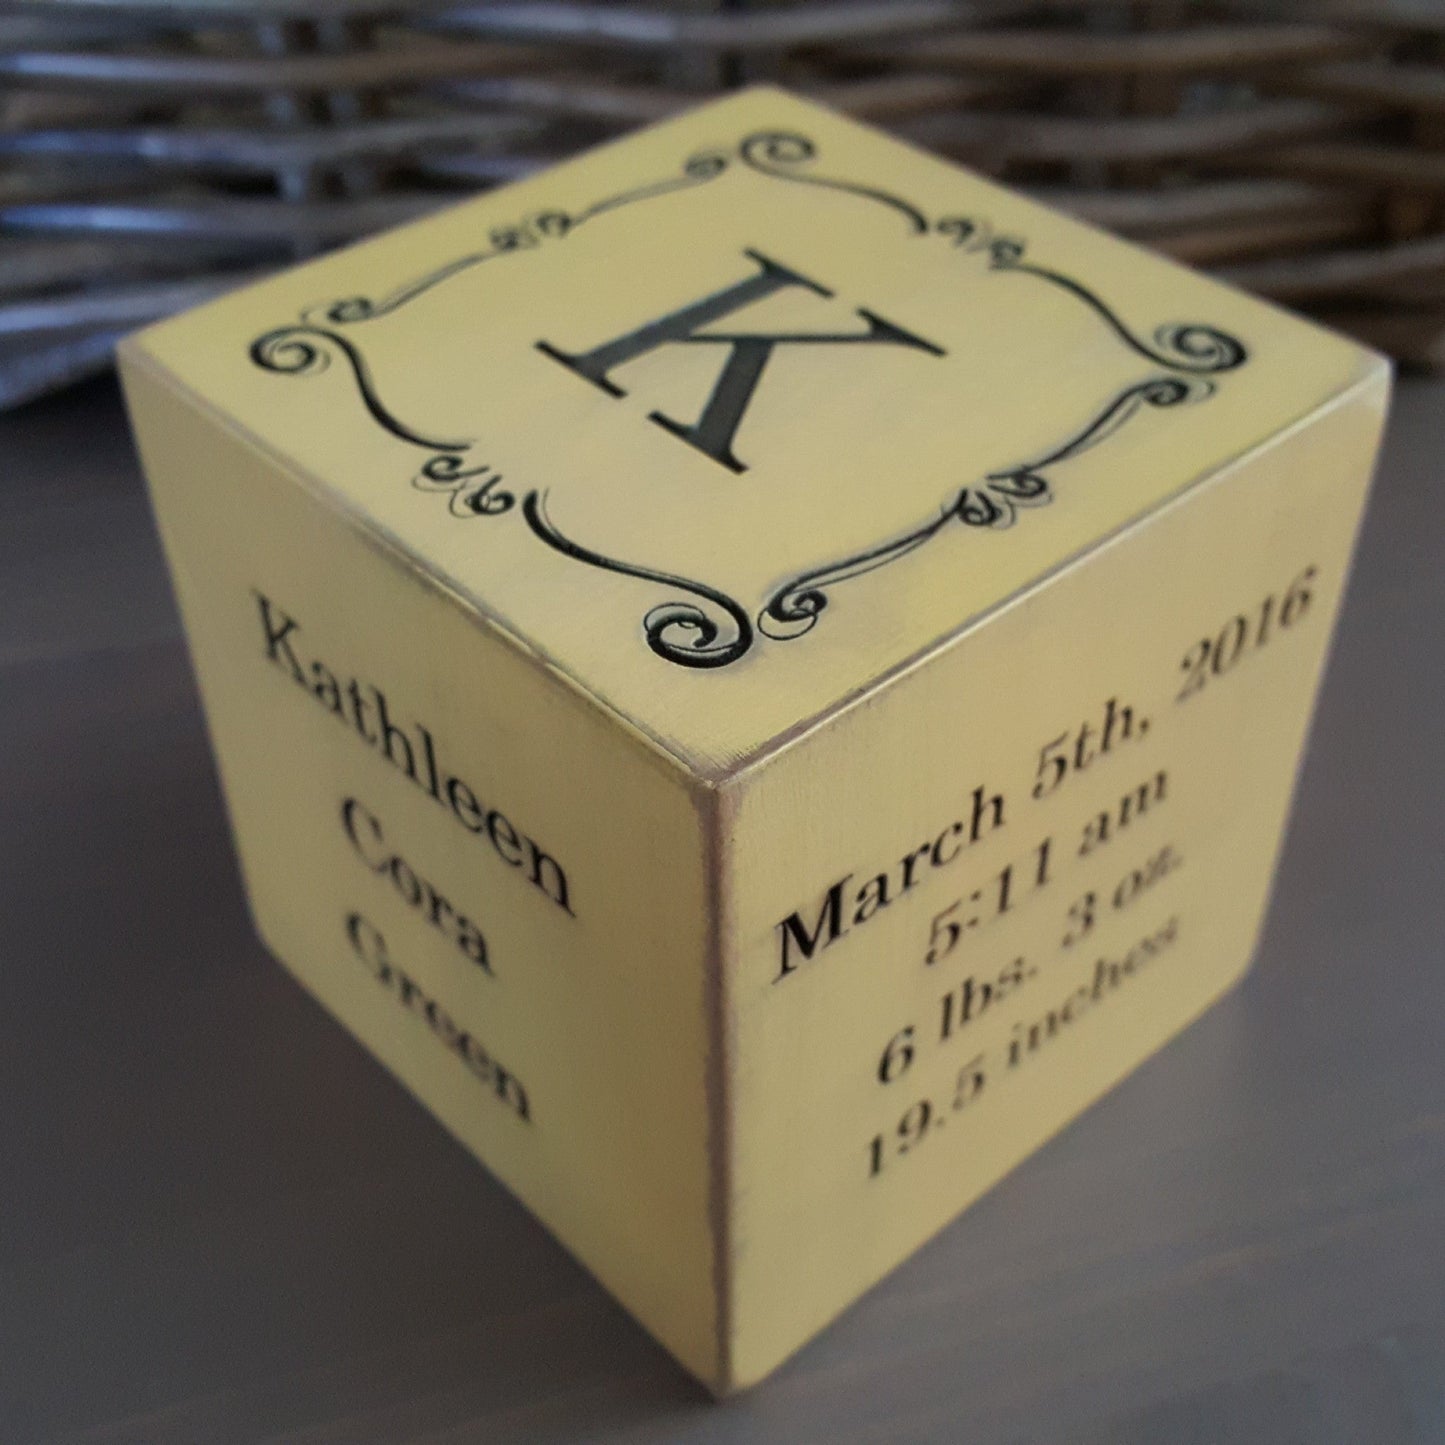 wooden block 3in size showing birth date and place, name, monogram 